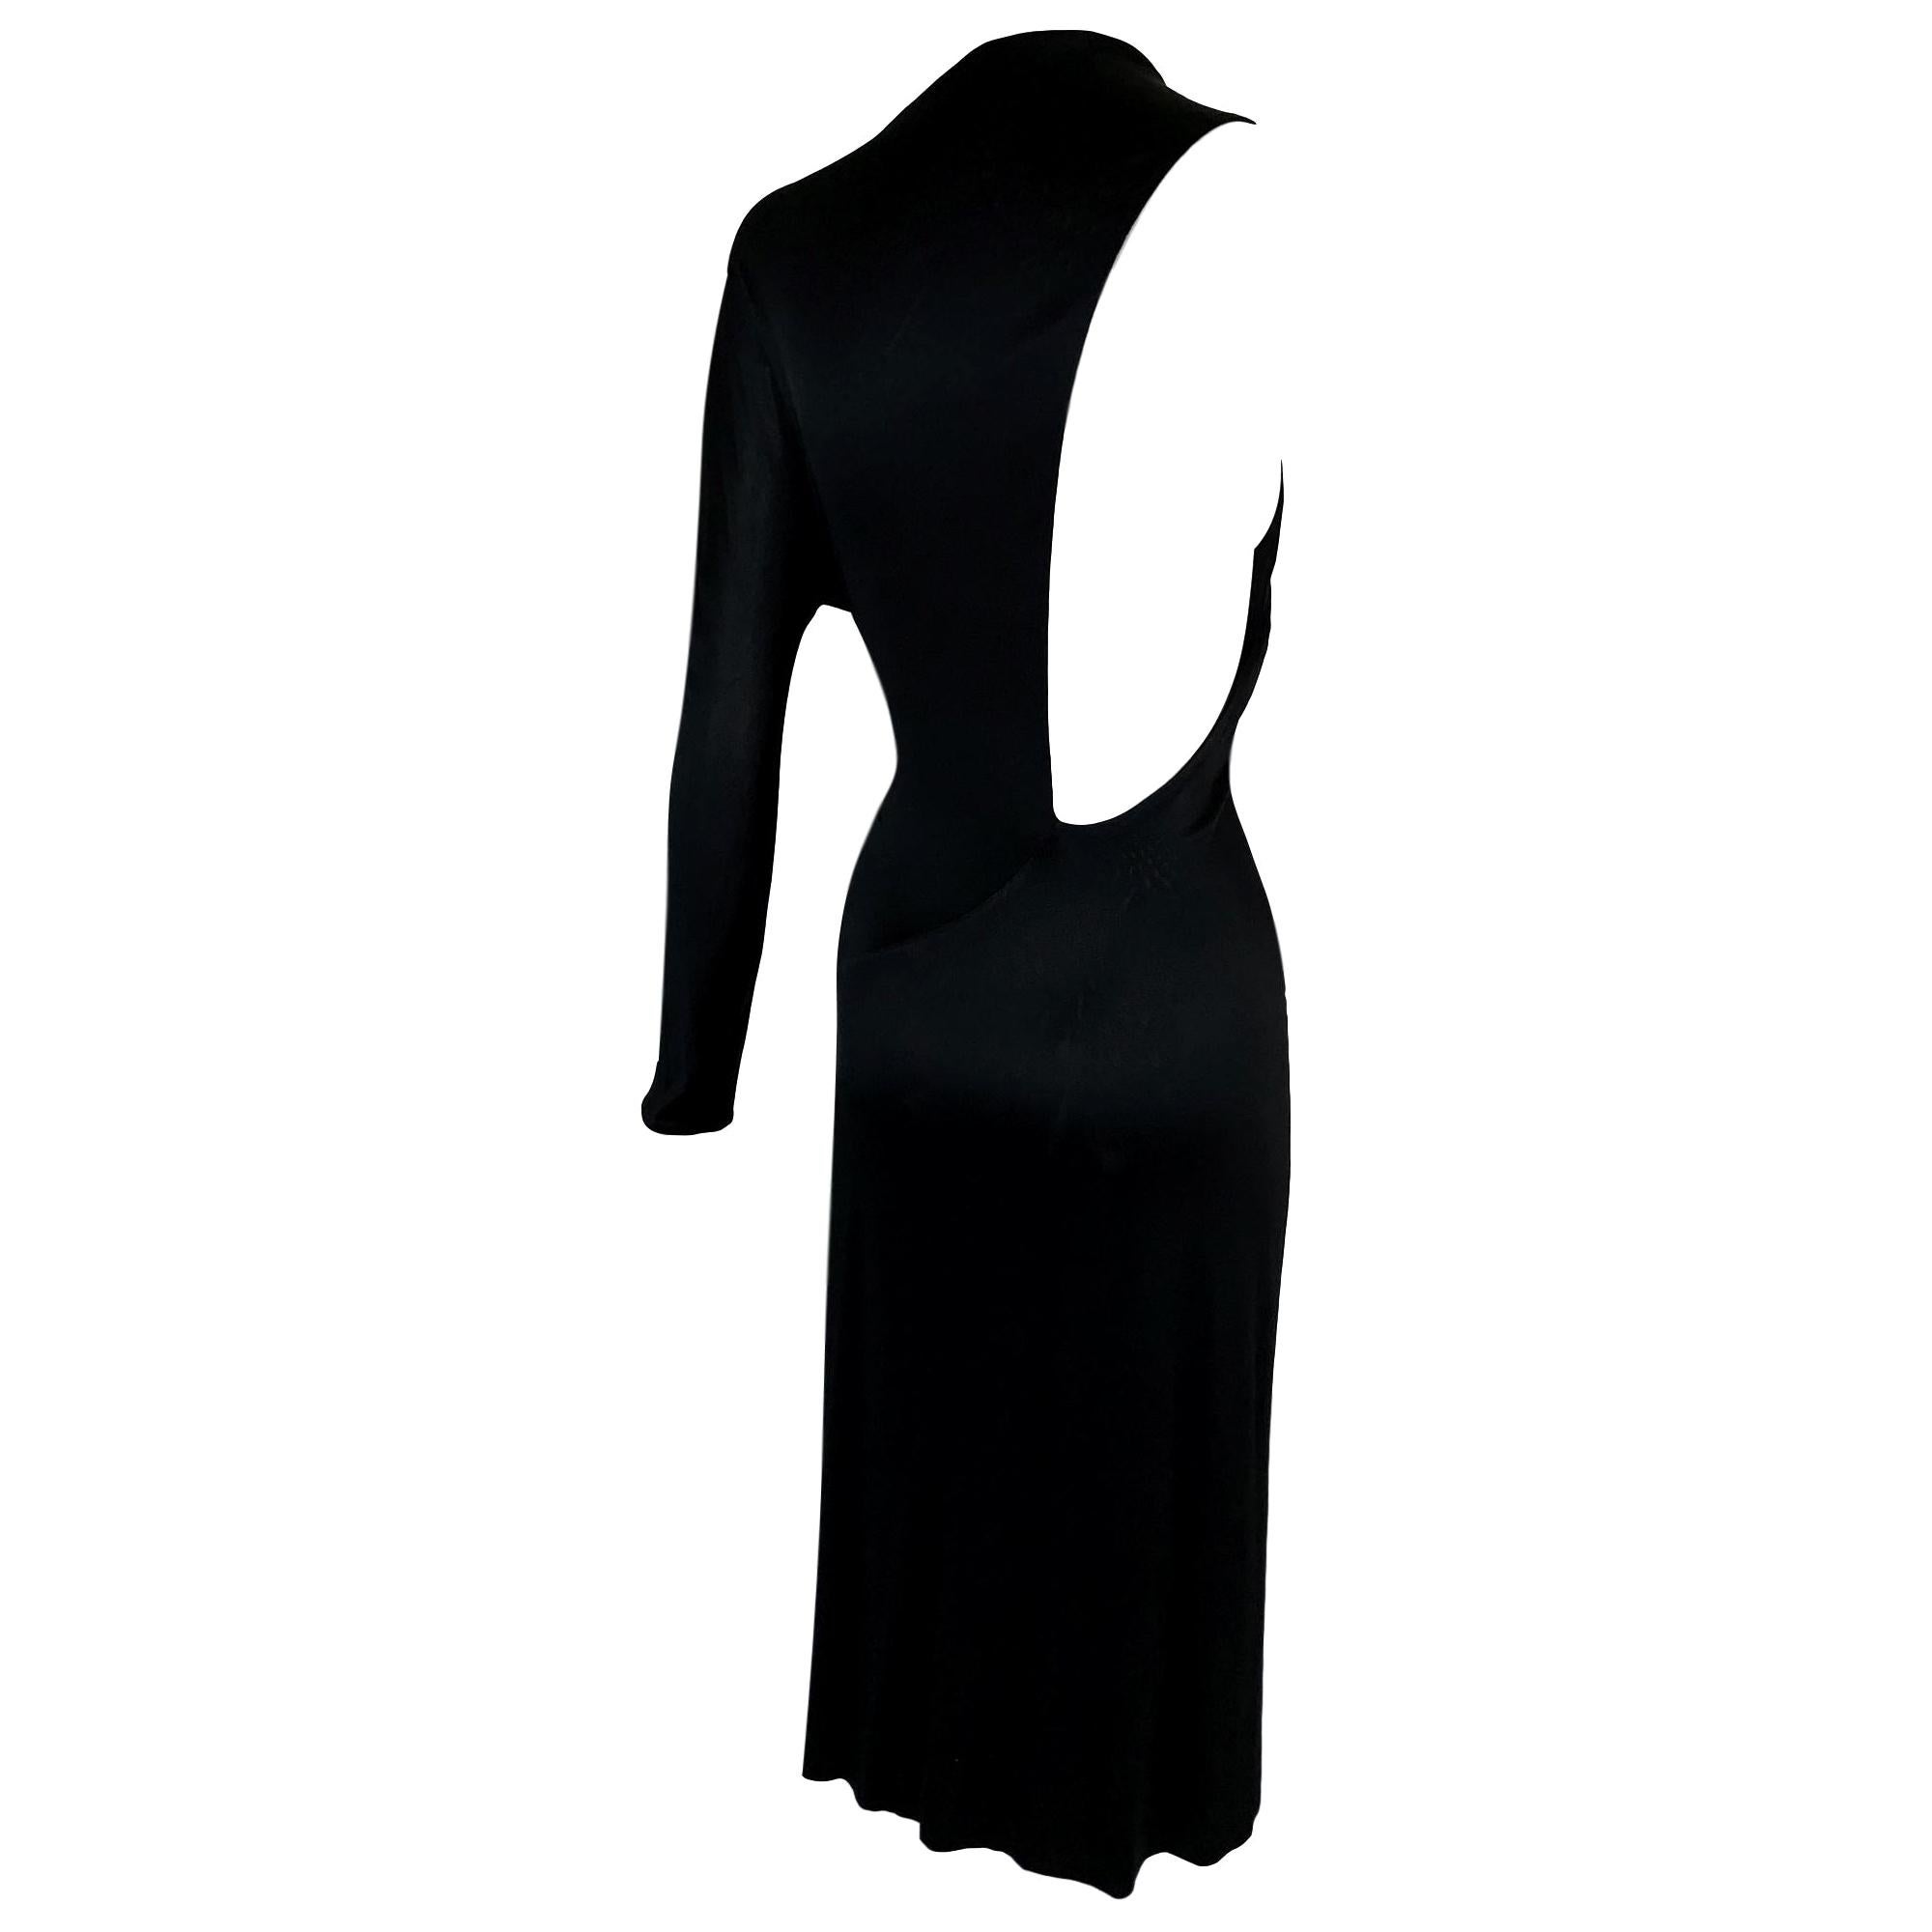 S/S 2000 Gucci Tom Ford Black One Arm Plunging Side & Back Slinky Dress